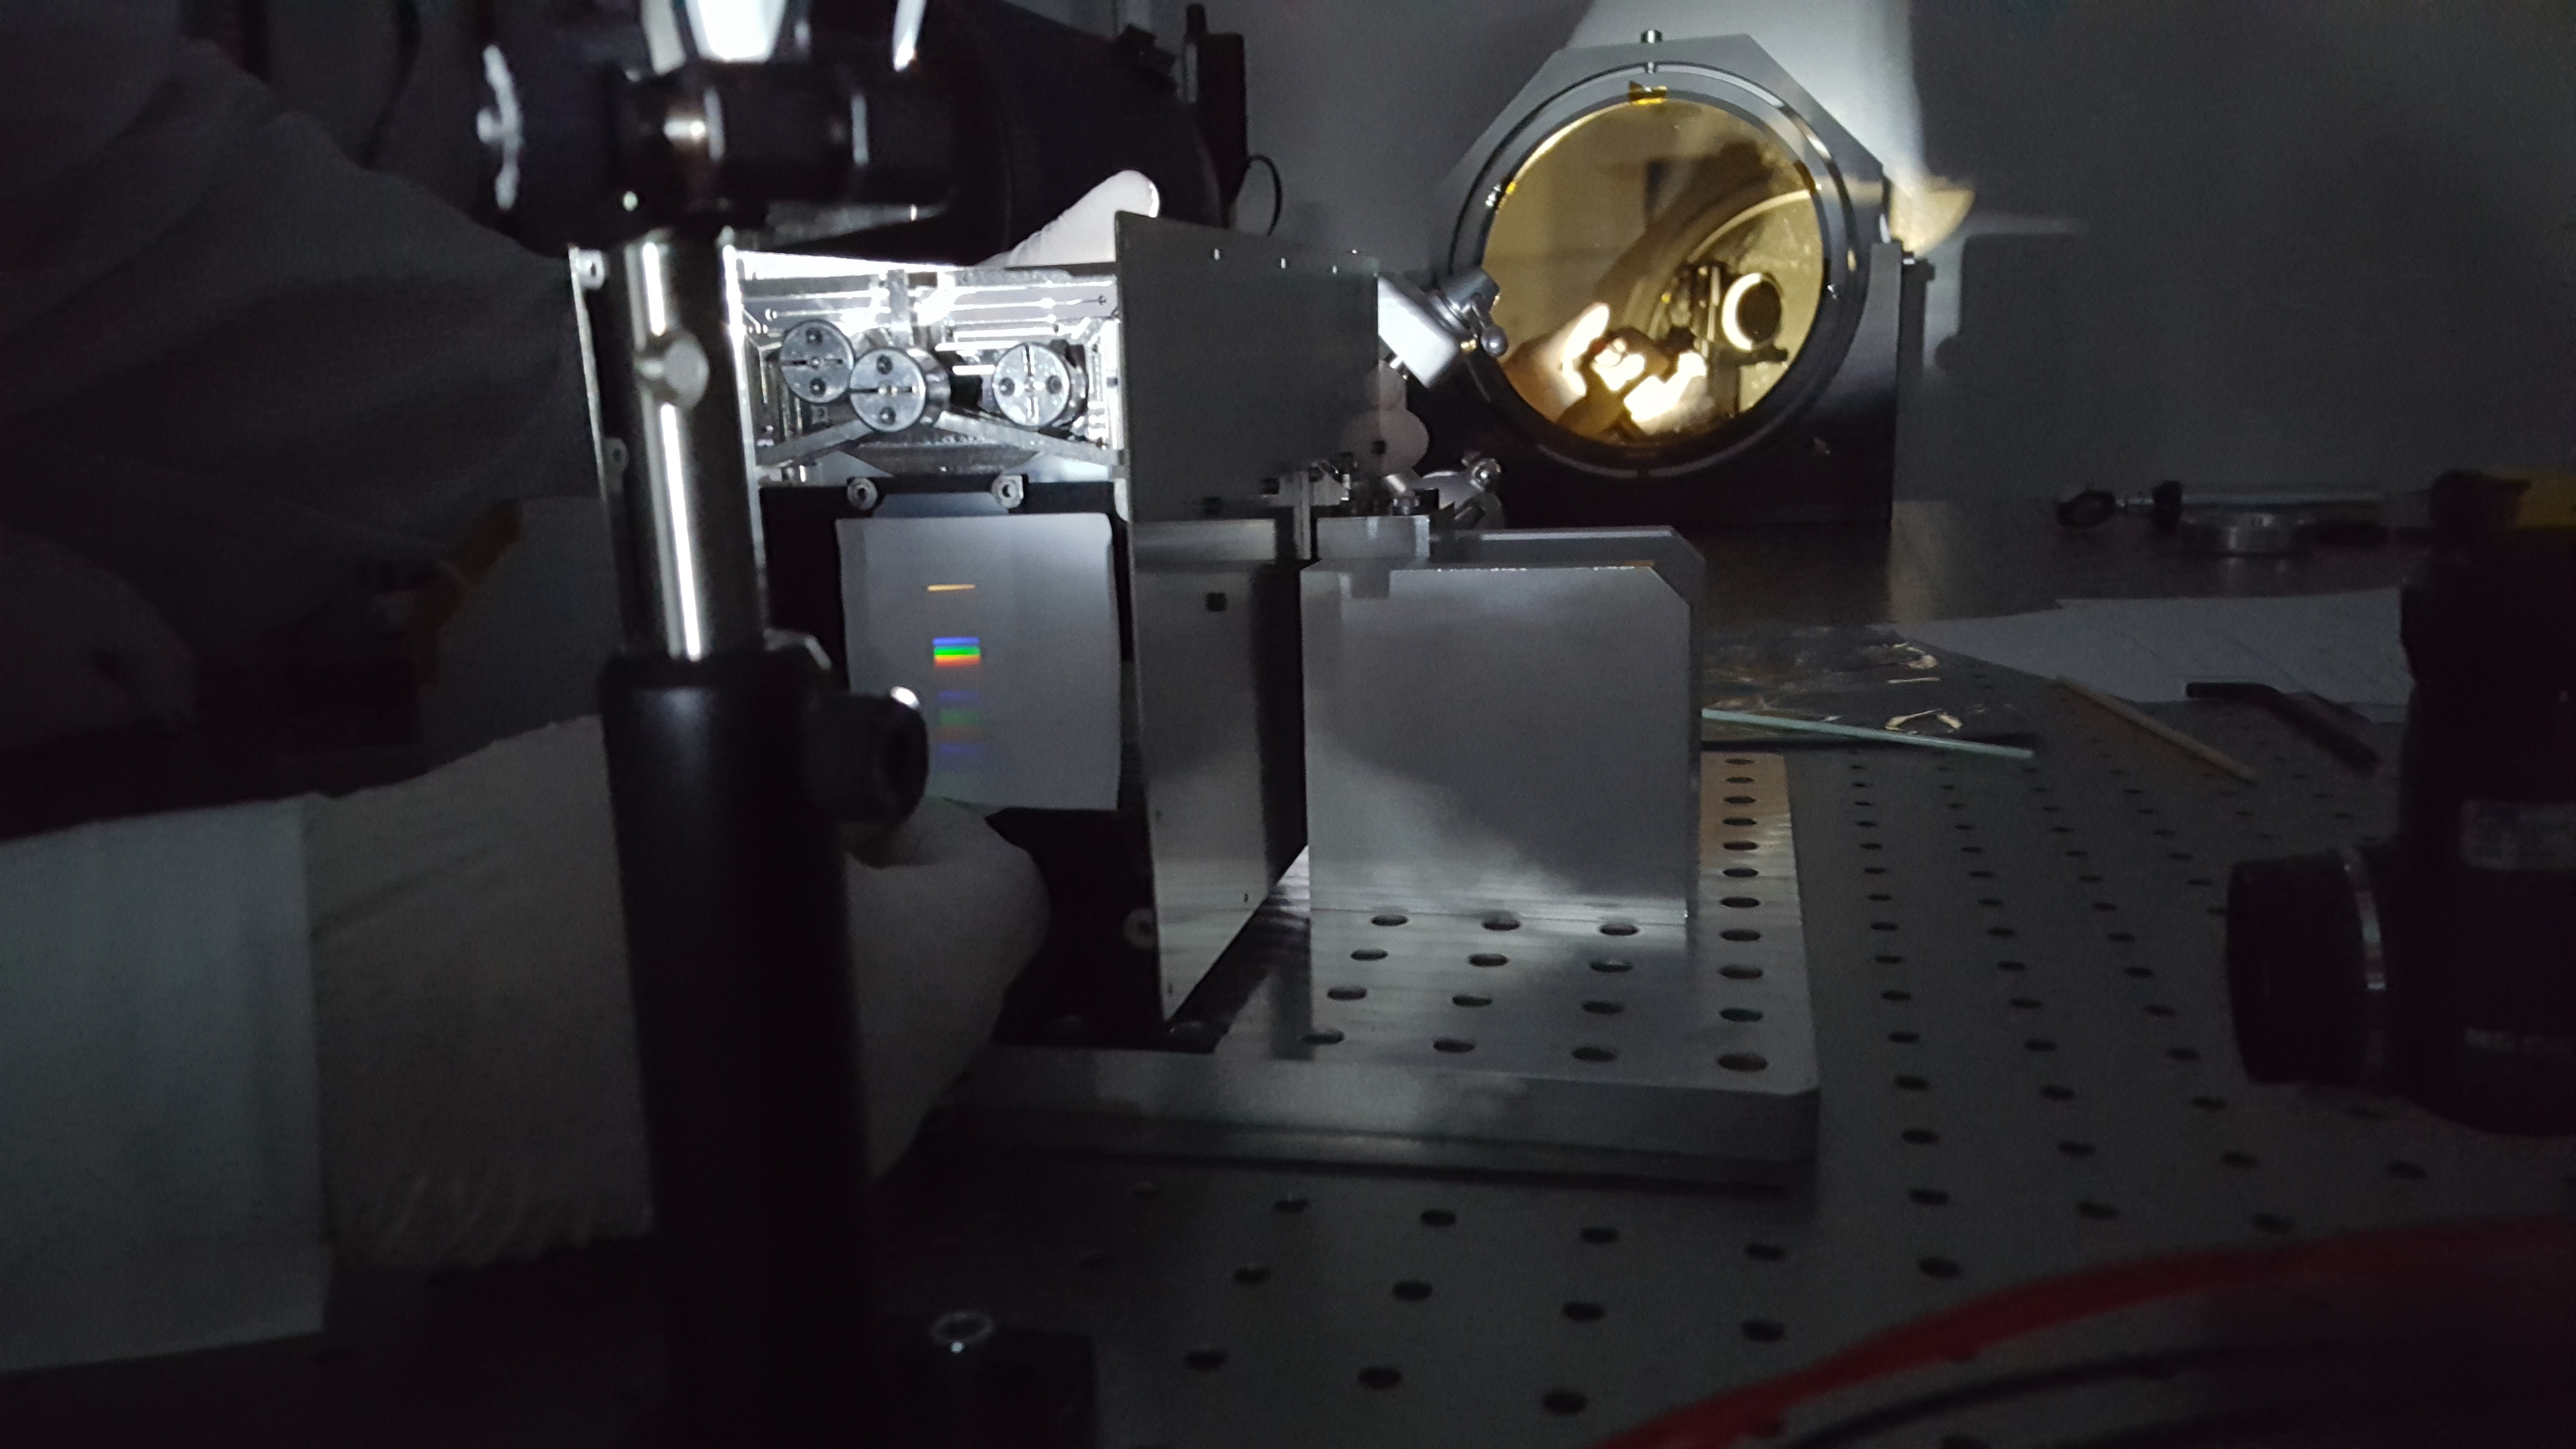 If you squint, there are three diffraction orders visible from this lab image of the CHAP hyperspectral imager.